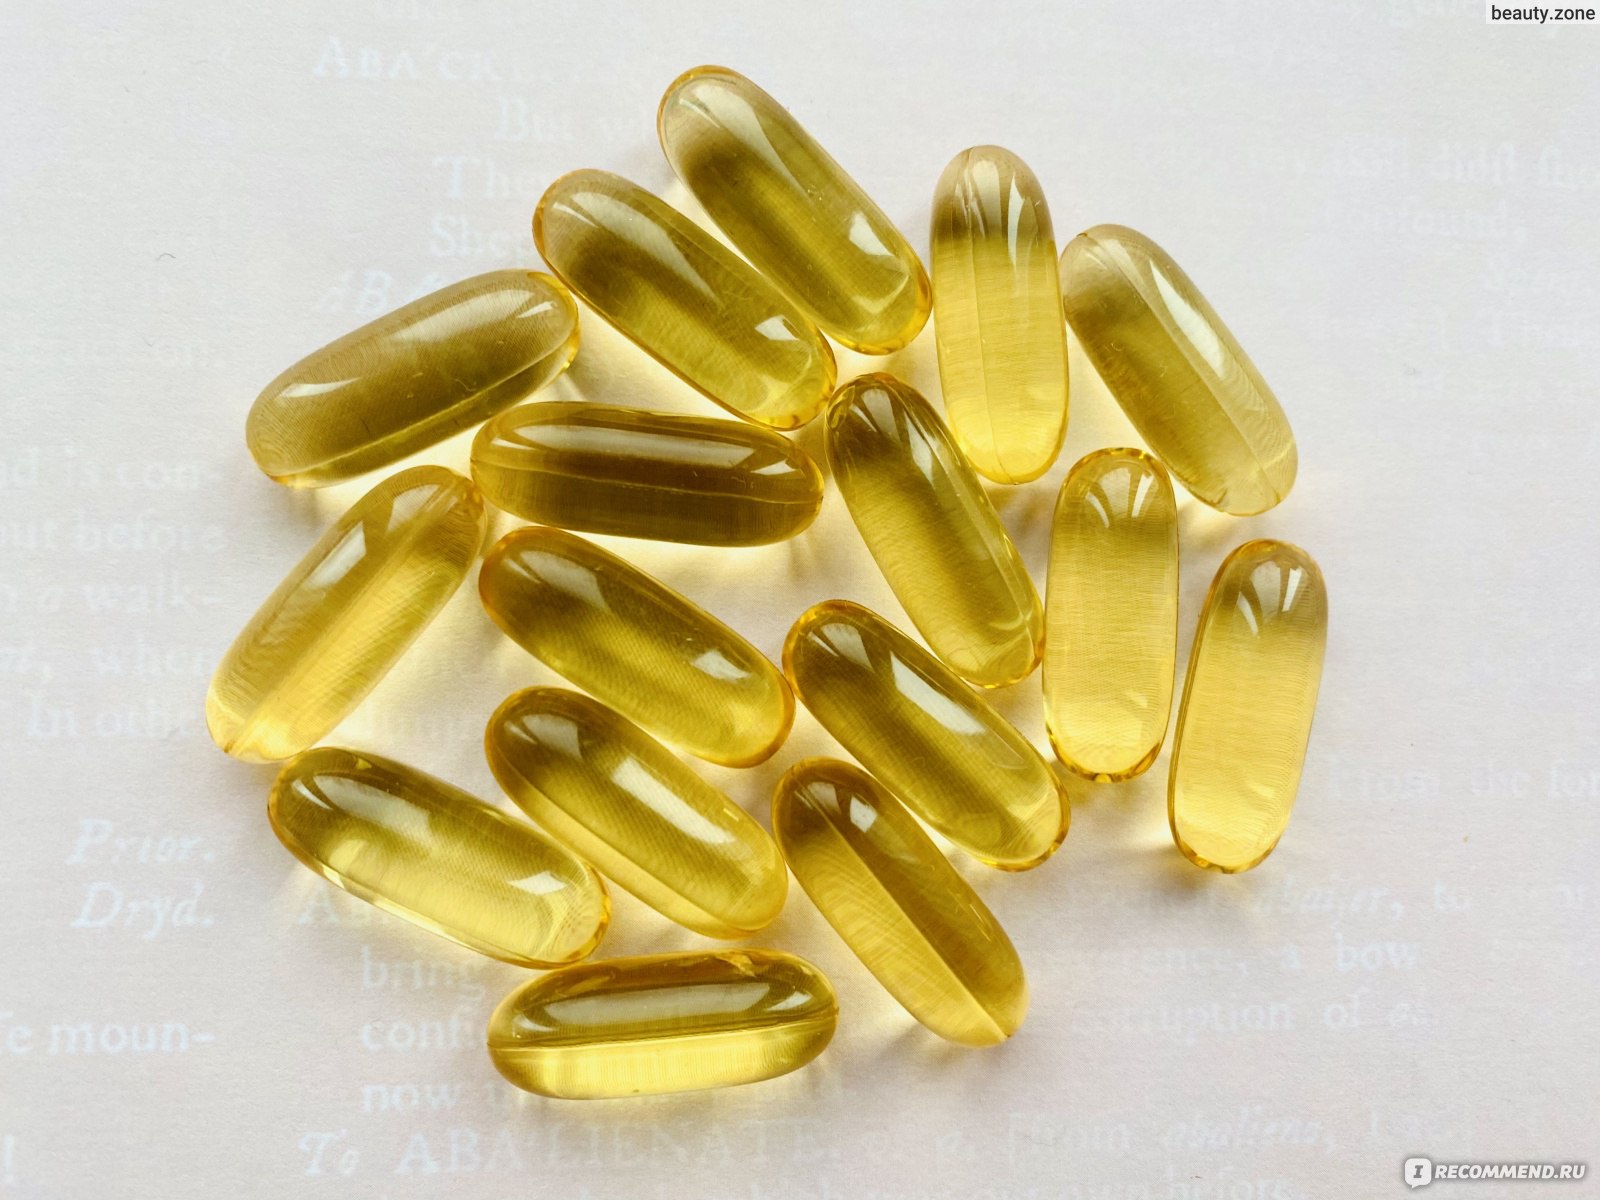 Omega 3 gold капсулы. Омега 3 капсулы. Капсулы Омега Омега. Мутные капсулы Омега 3. Омега 3 желтые капсулы.